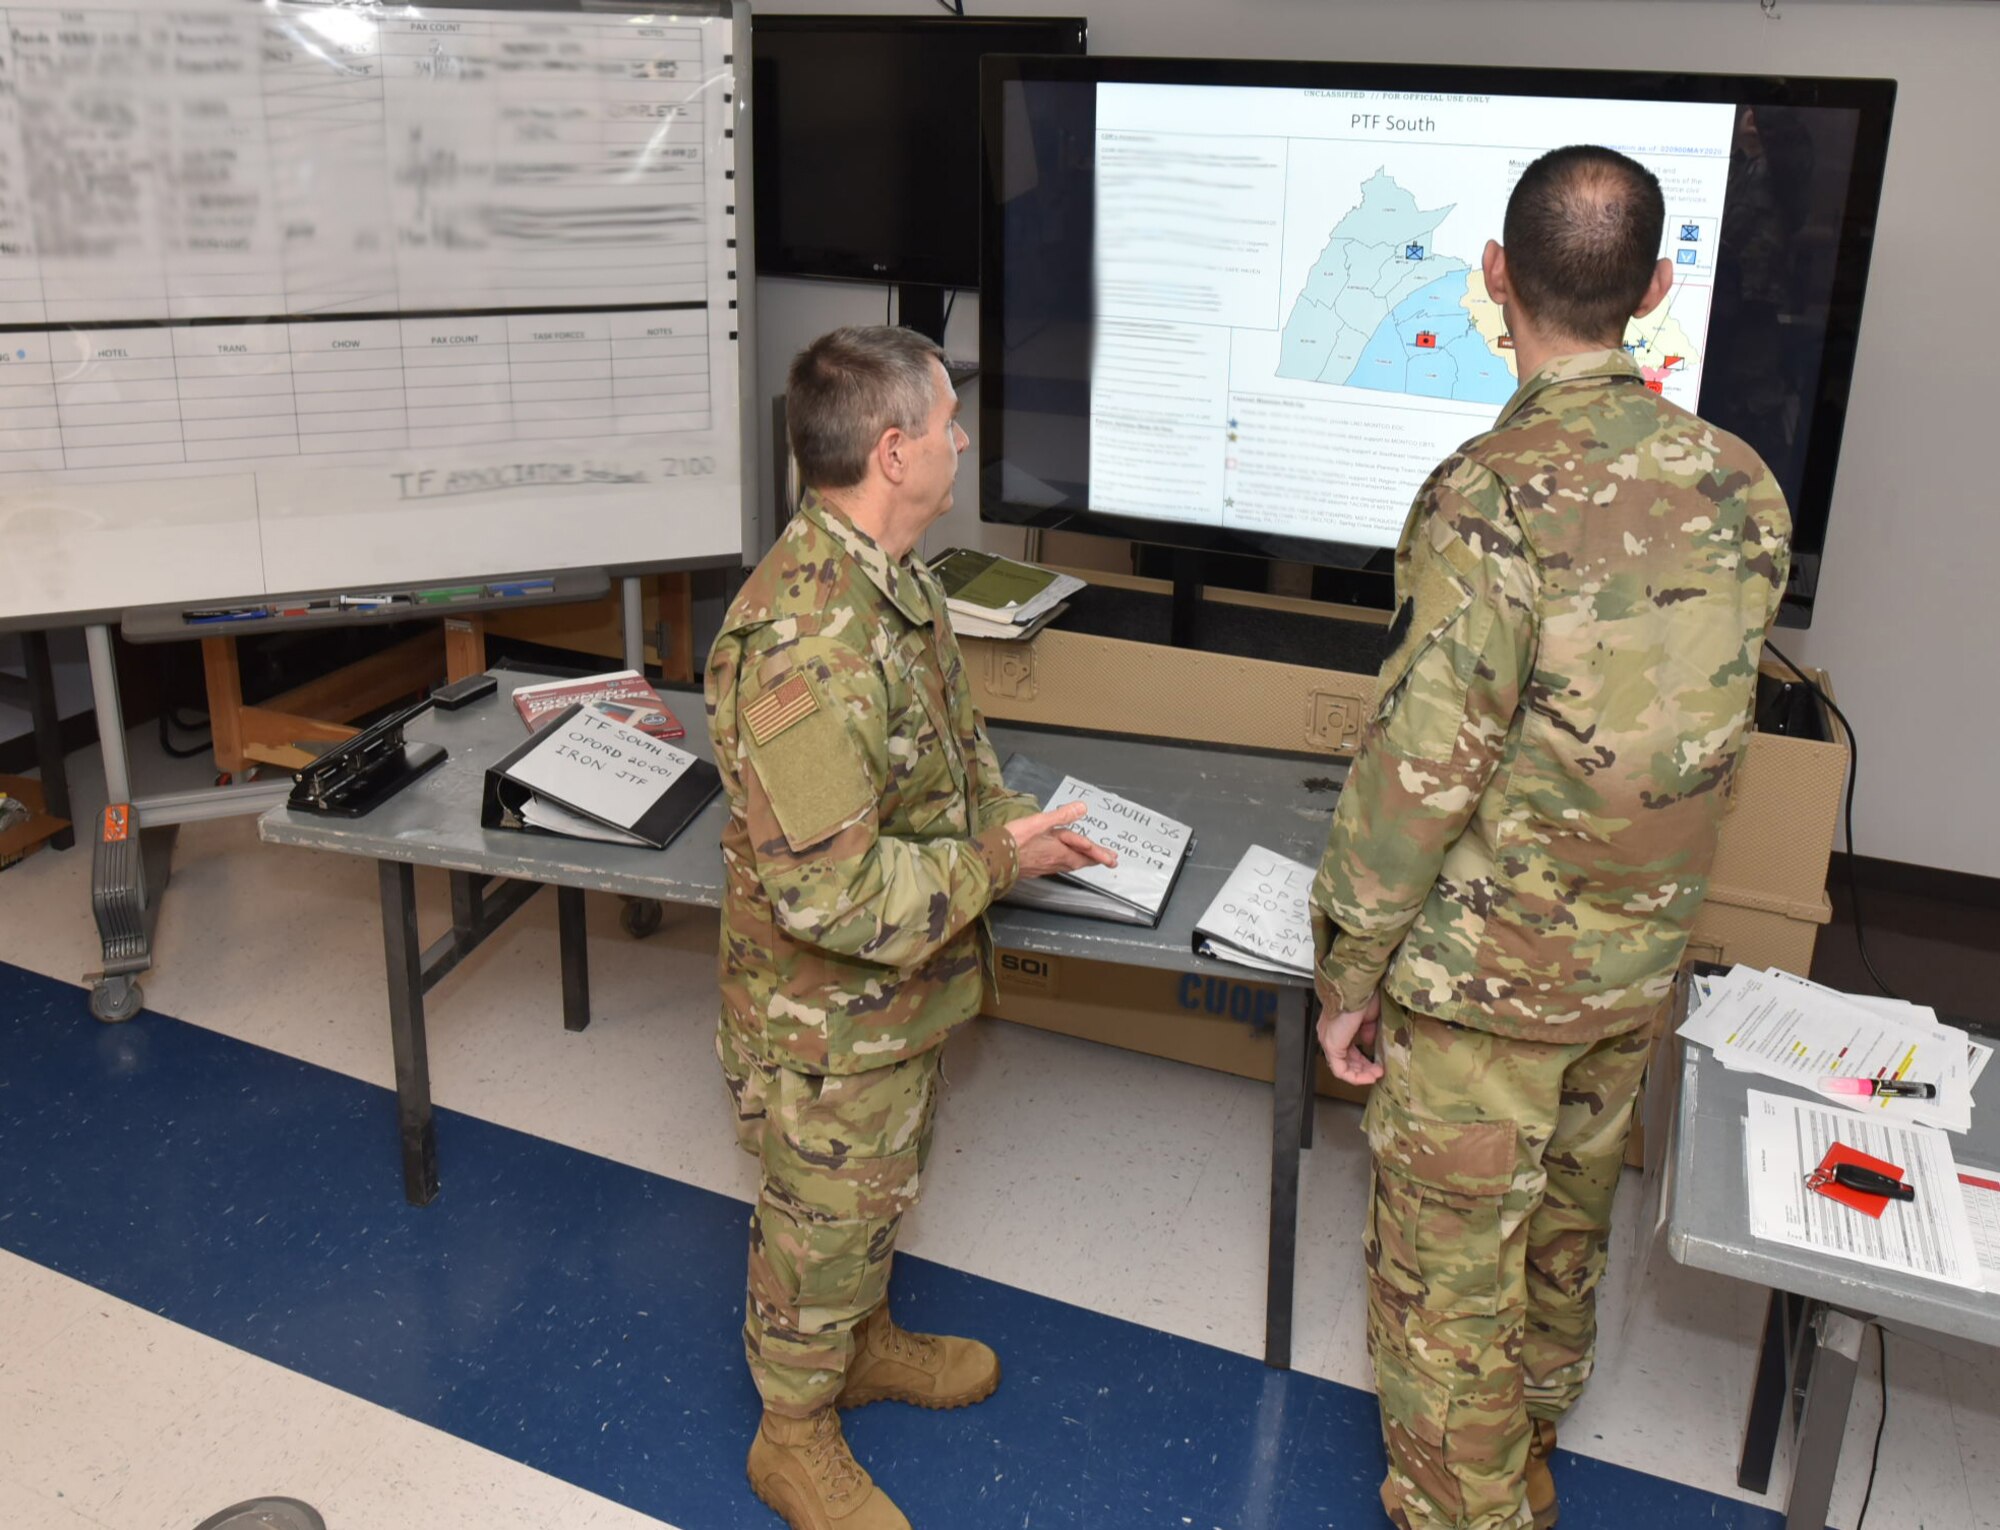 Col. Scott Coradi, left, and Col. Jon Farr discuss operational plans while overlooking a map of the area of operations for Pennsylvania Task Force South at Horsham Air Guard Station, Pennsylvania, May 2, 2020.